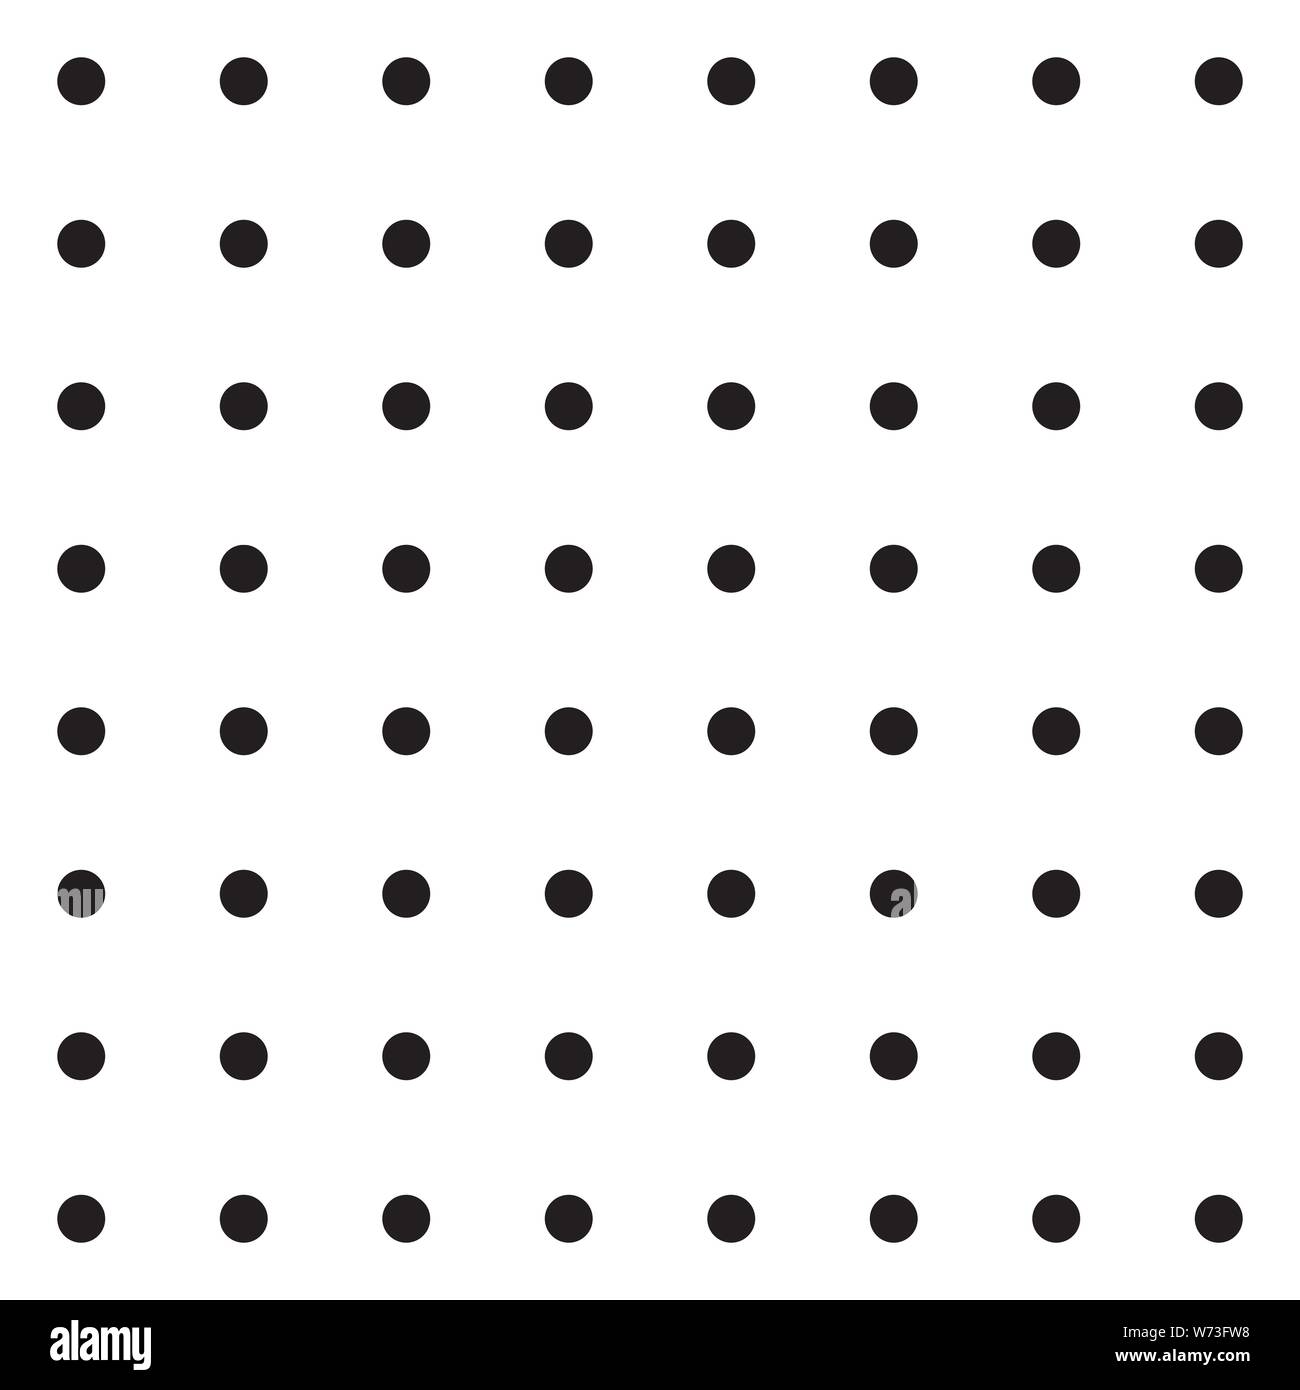 Seamless monochrome pattern with polka dots. Dotted background. Endless decorative linear round texture. Black and white decorative element. Simple ge Stock Vector